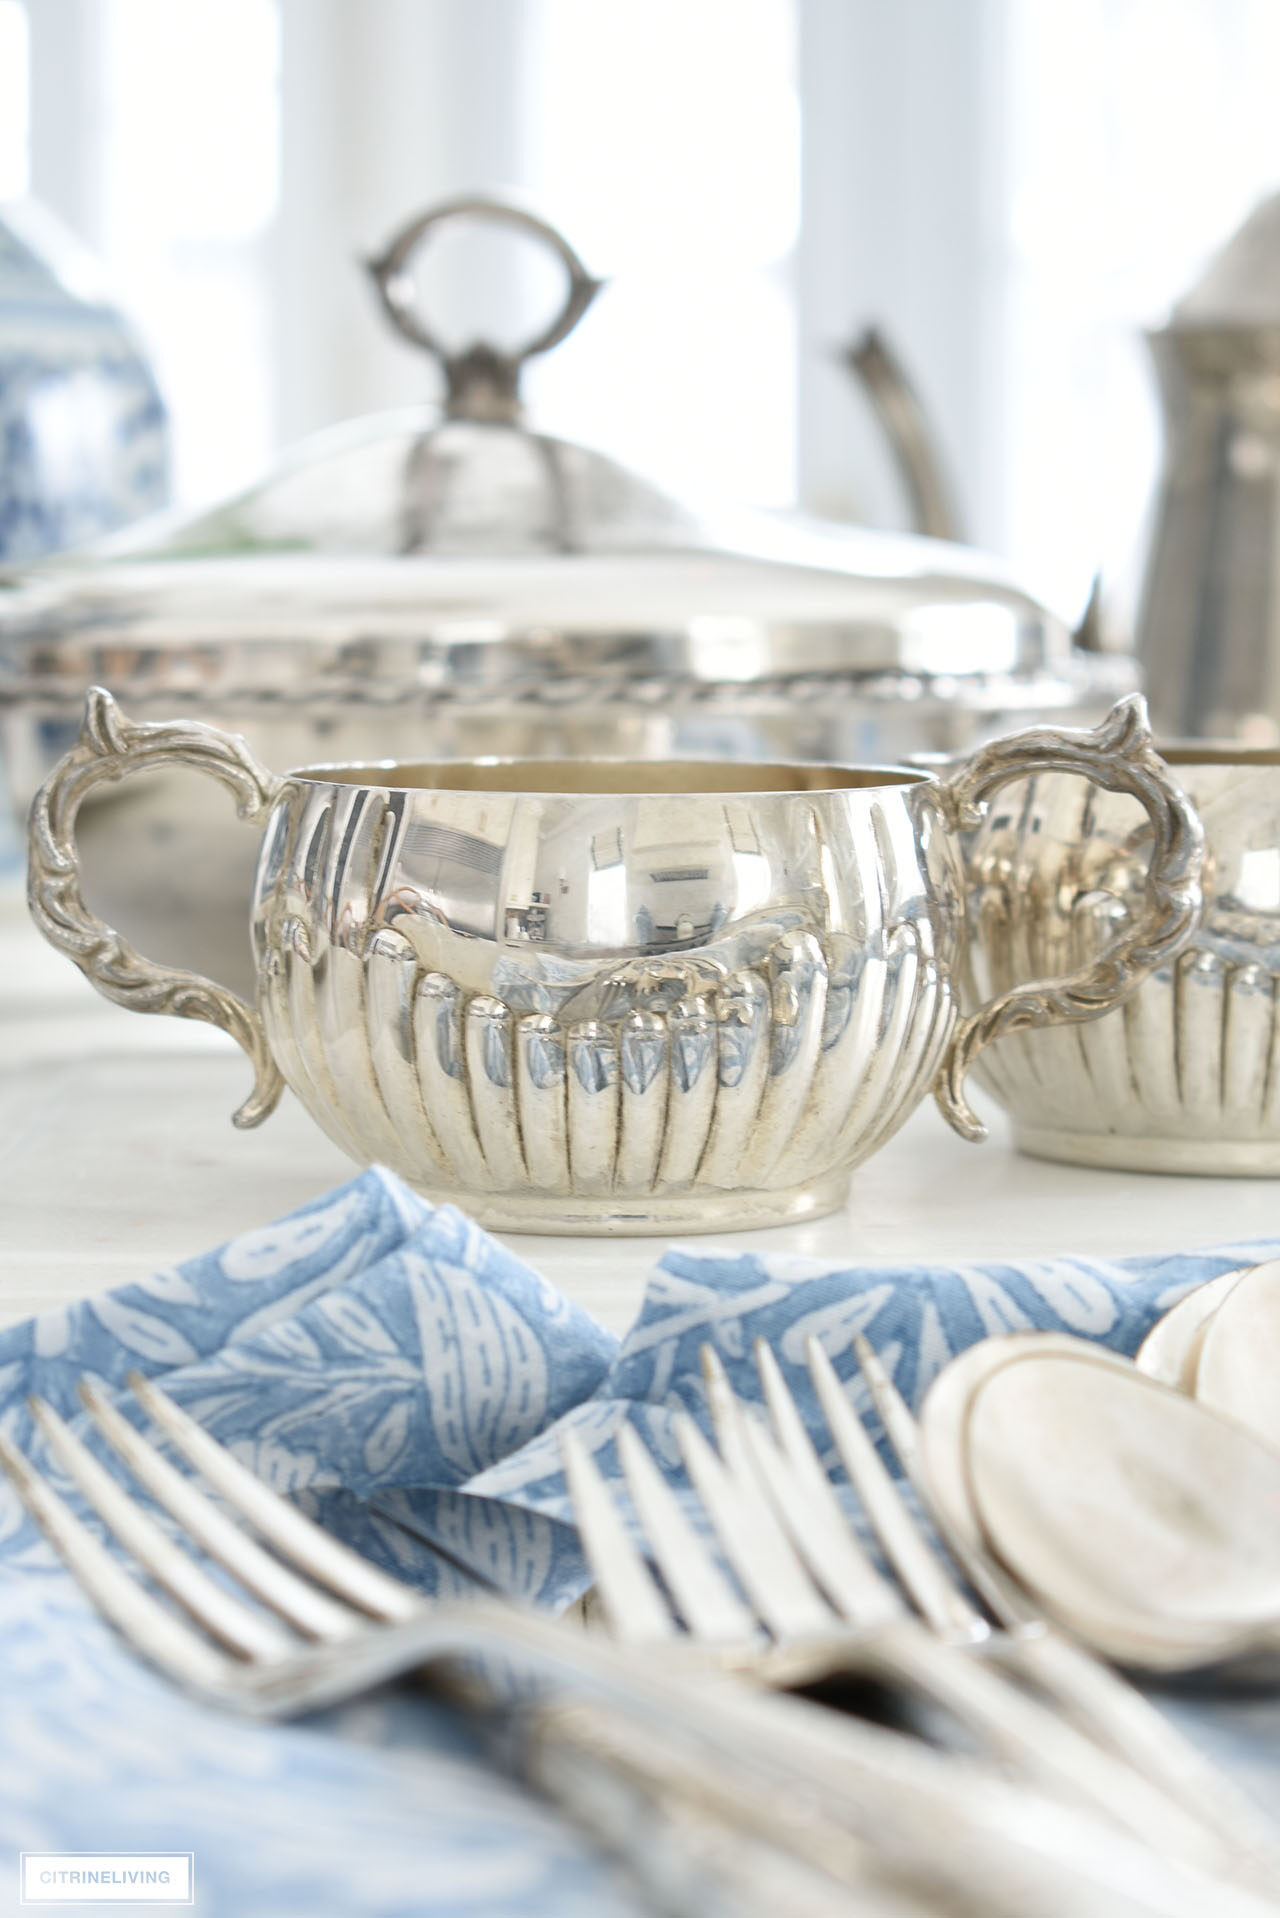 Can You Put Silver-Plated Silverware In The Dishwasher?